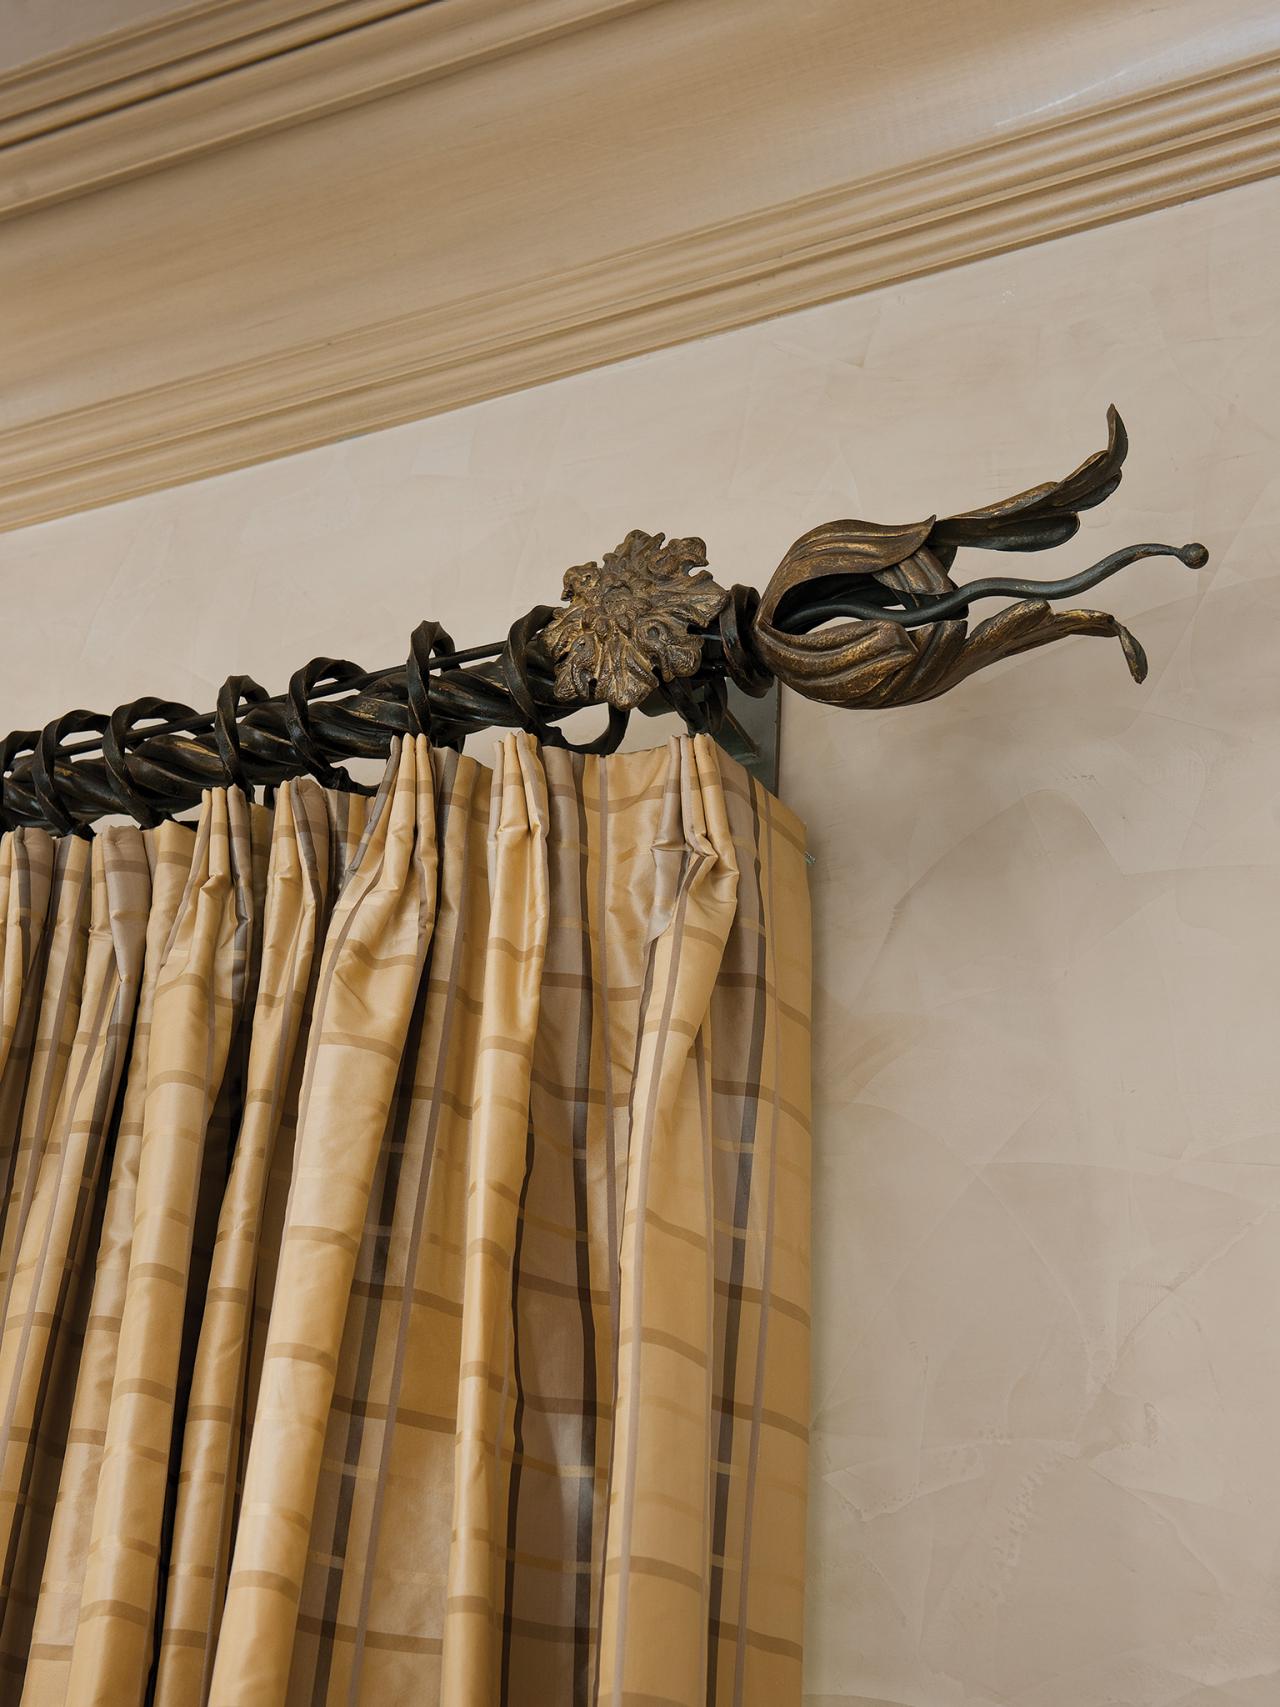 Command Hooks For Curtains Rustic Curtain Rods